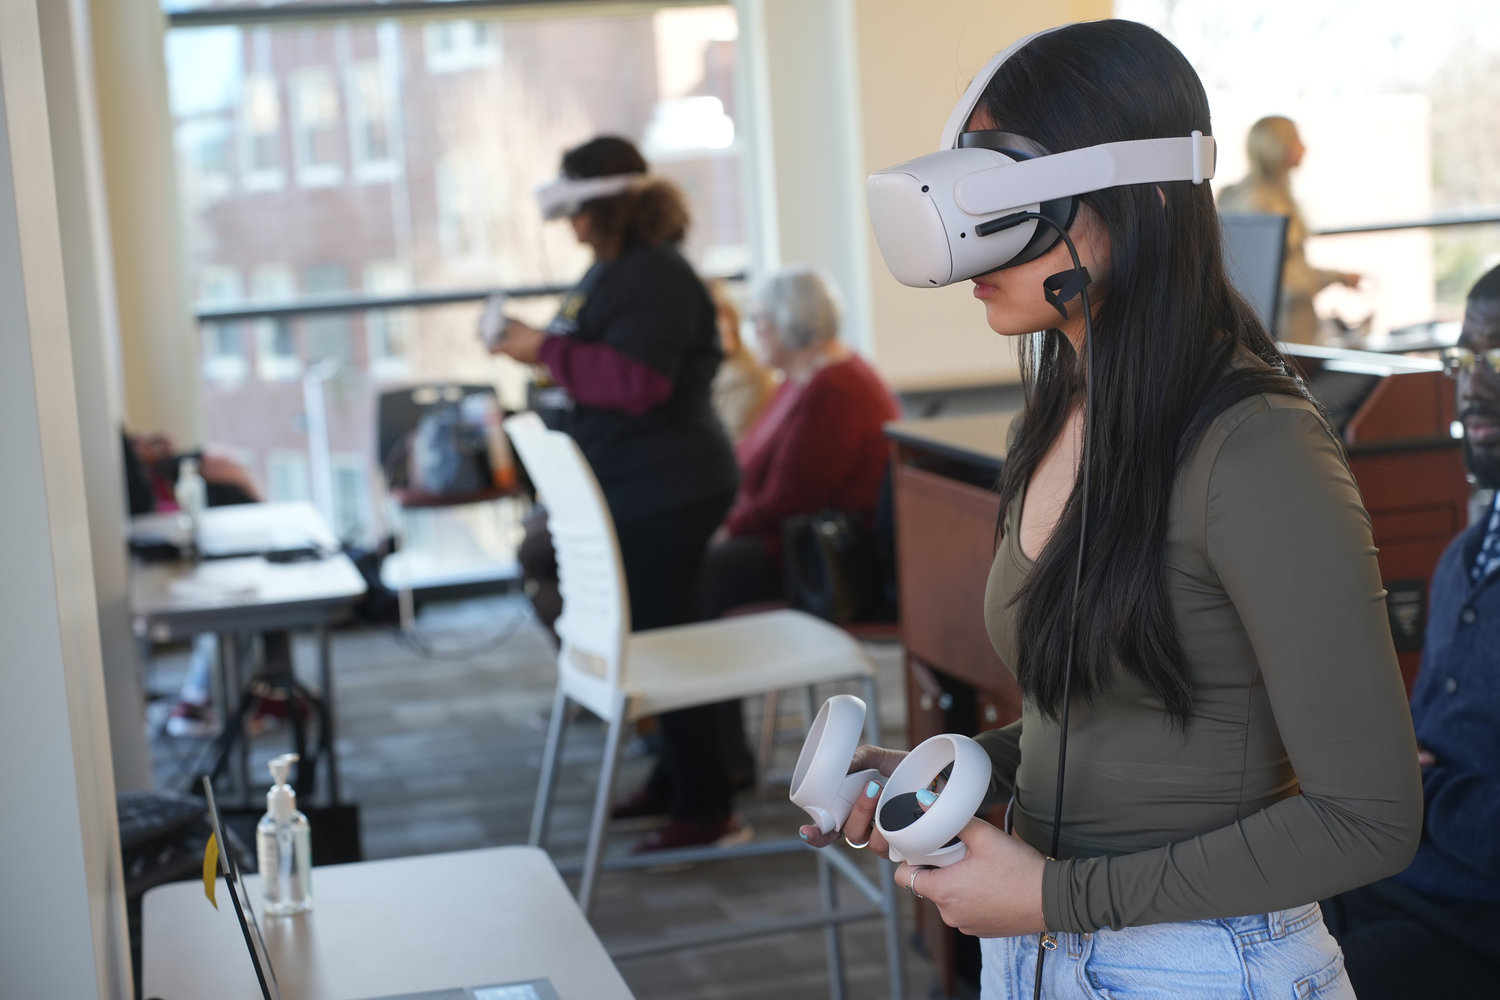 Kendra Teran, an 11th-grade student from Freeport High School tries out the virtual experience during the MLK Day of Service at Molloy University.